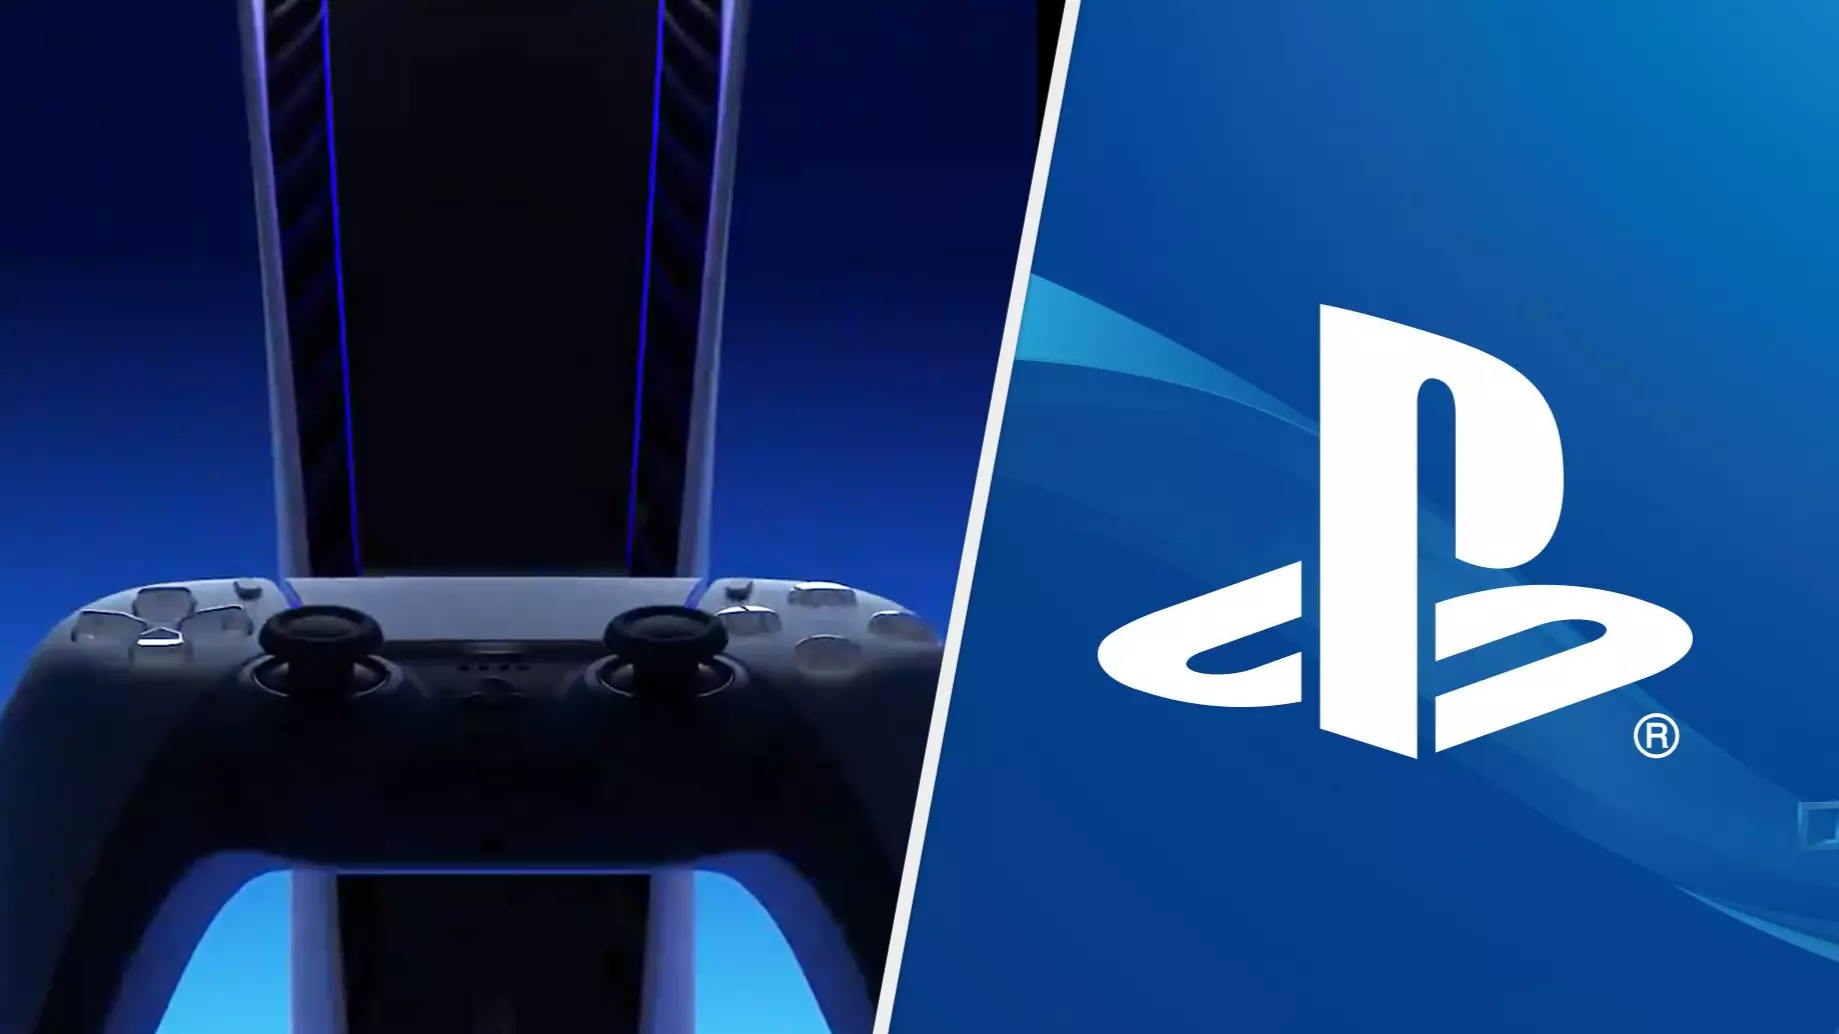 Major PlayStation 5 Event Coming This Week, Sony Confirms 